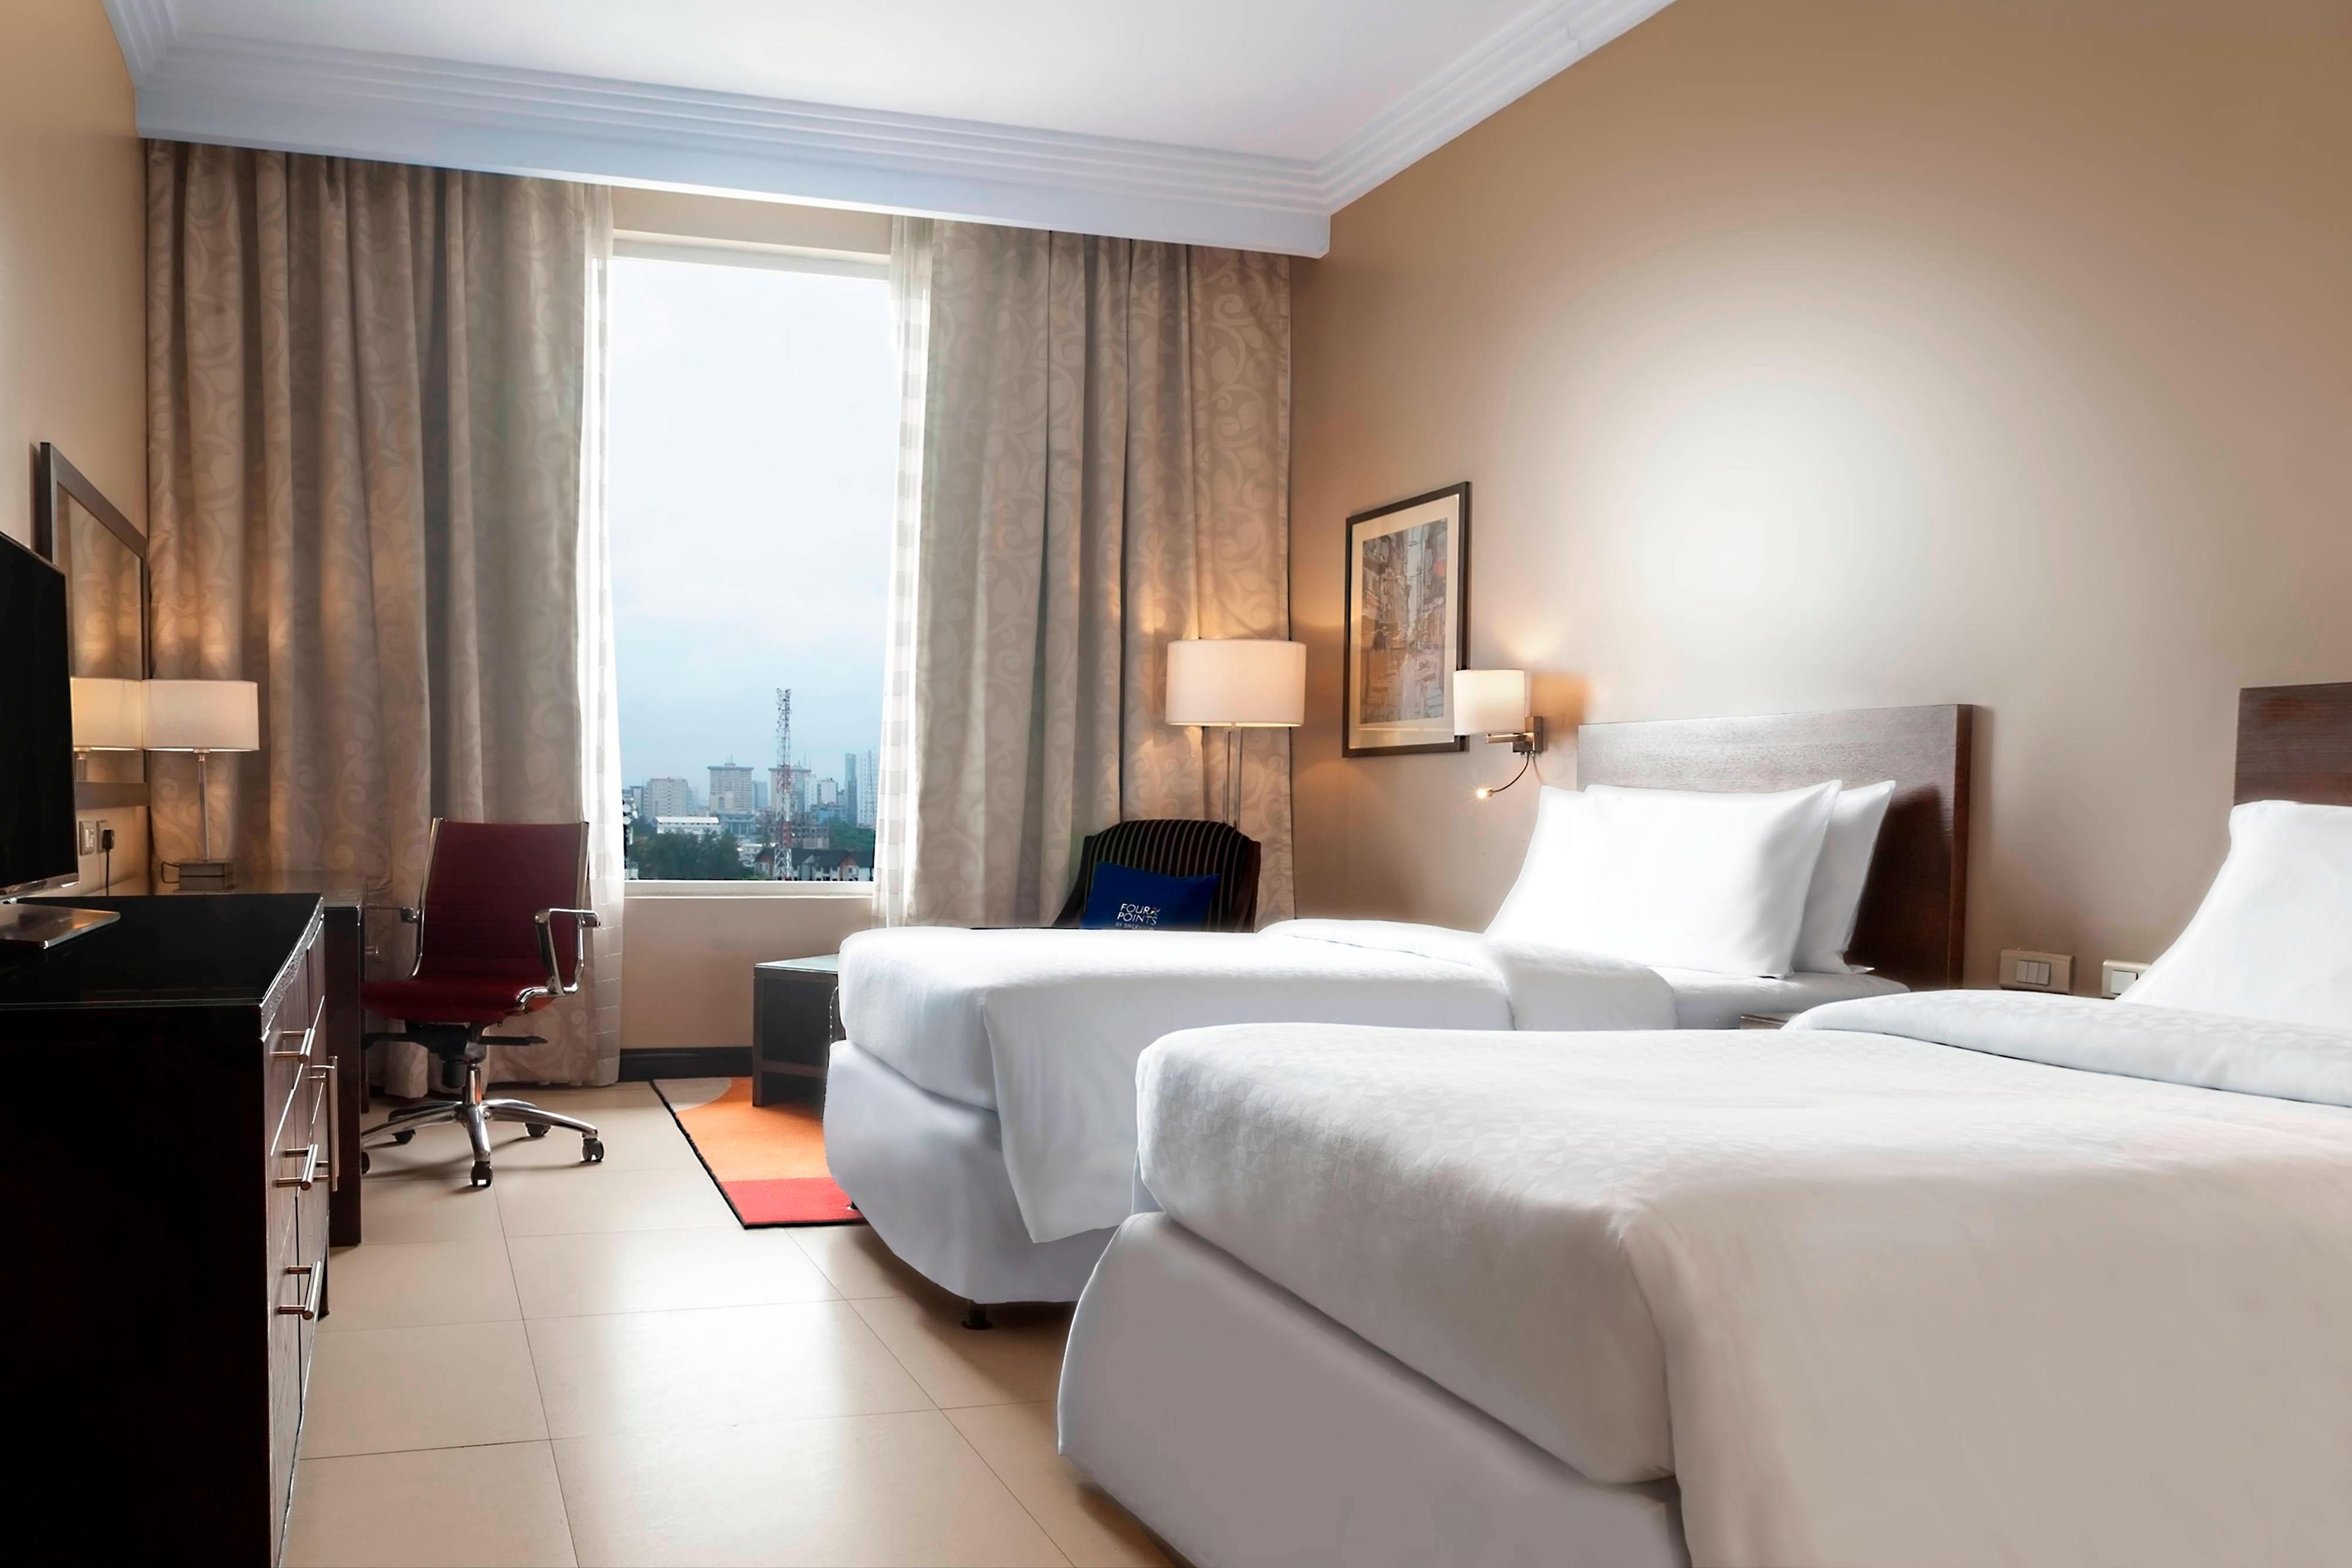 Our Executive Twin Room is connected to the King Executive Rooms and is located on the topmost floor, providing far reaching views of the stunning Victoria Island Views.